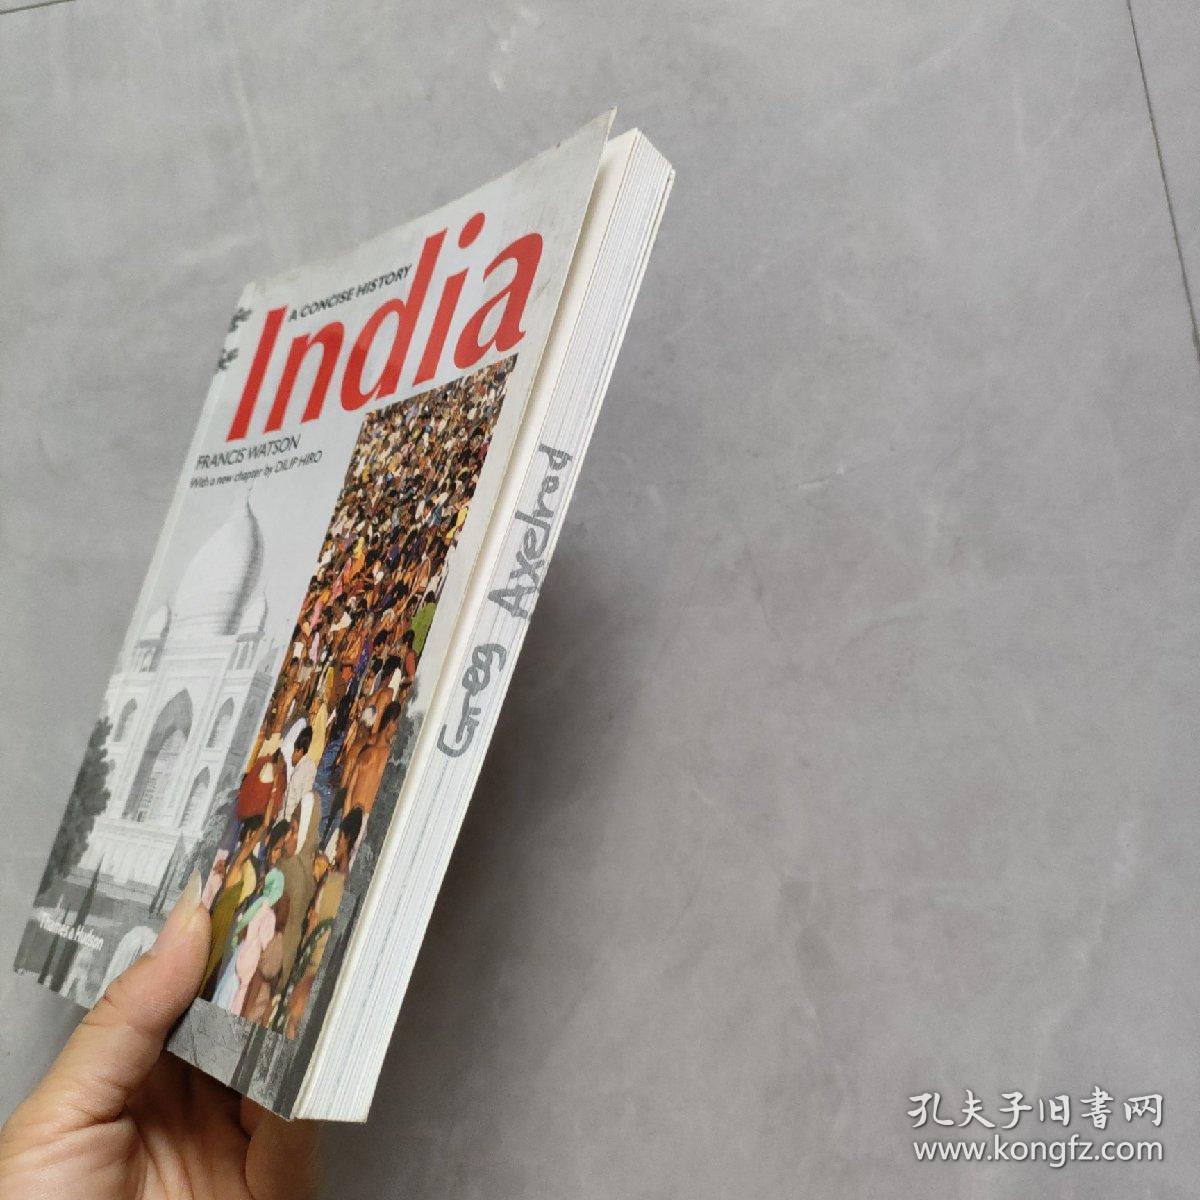 India A CONCISE HISTORY  印度辉煌历史